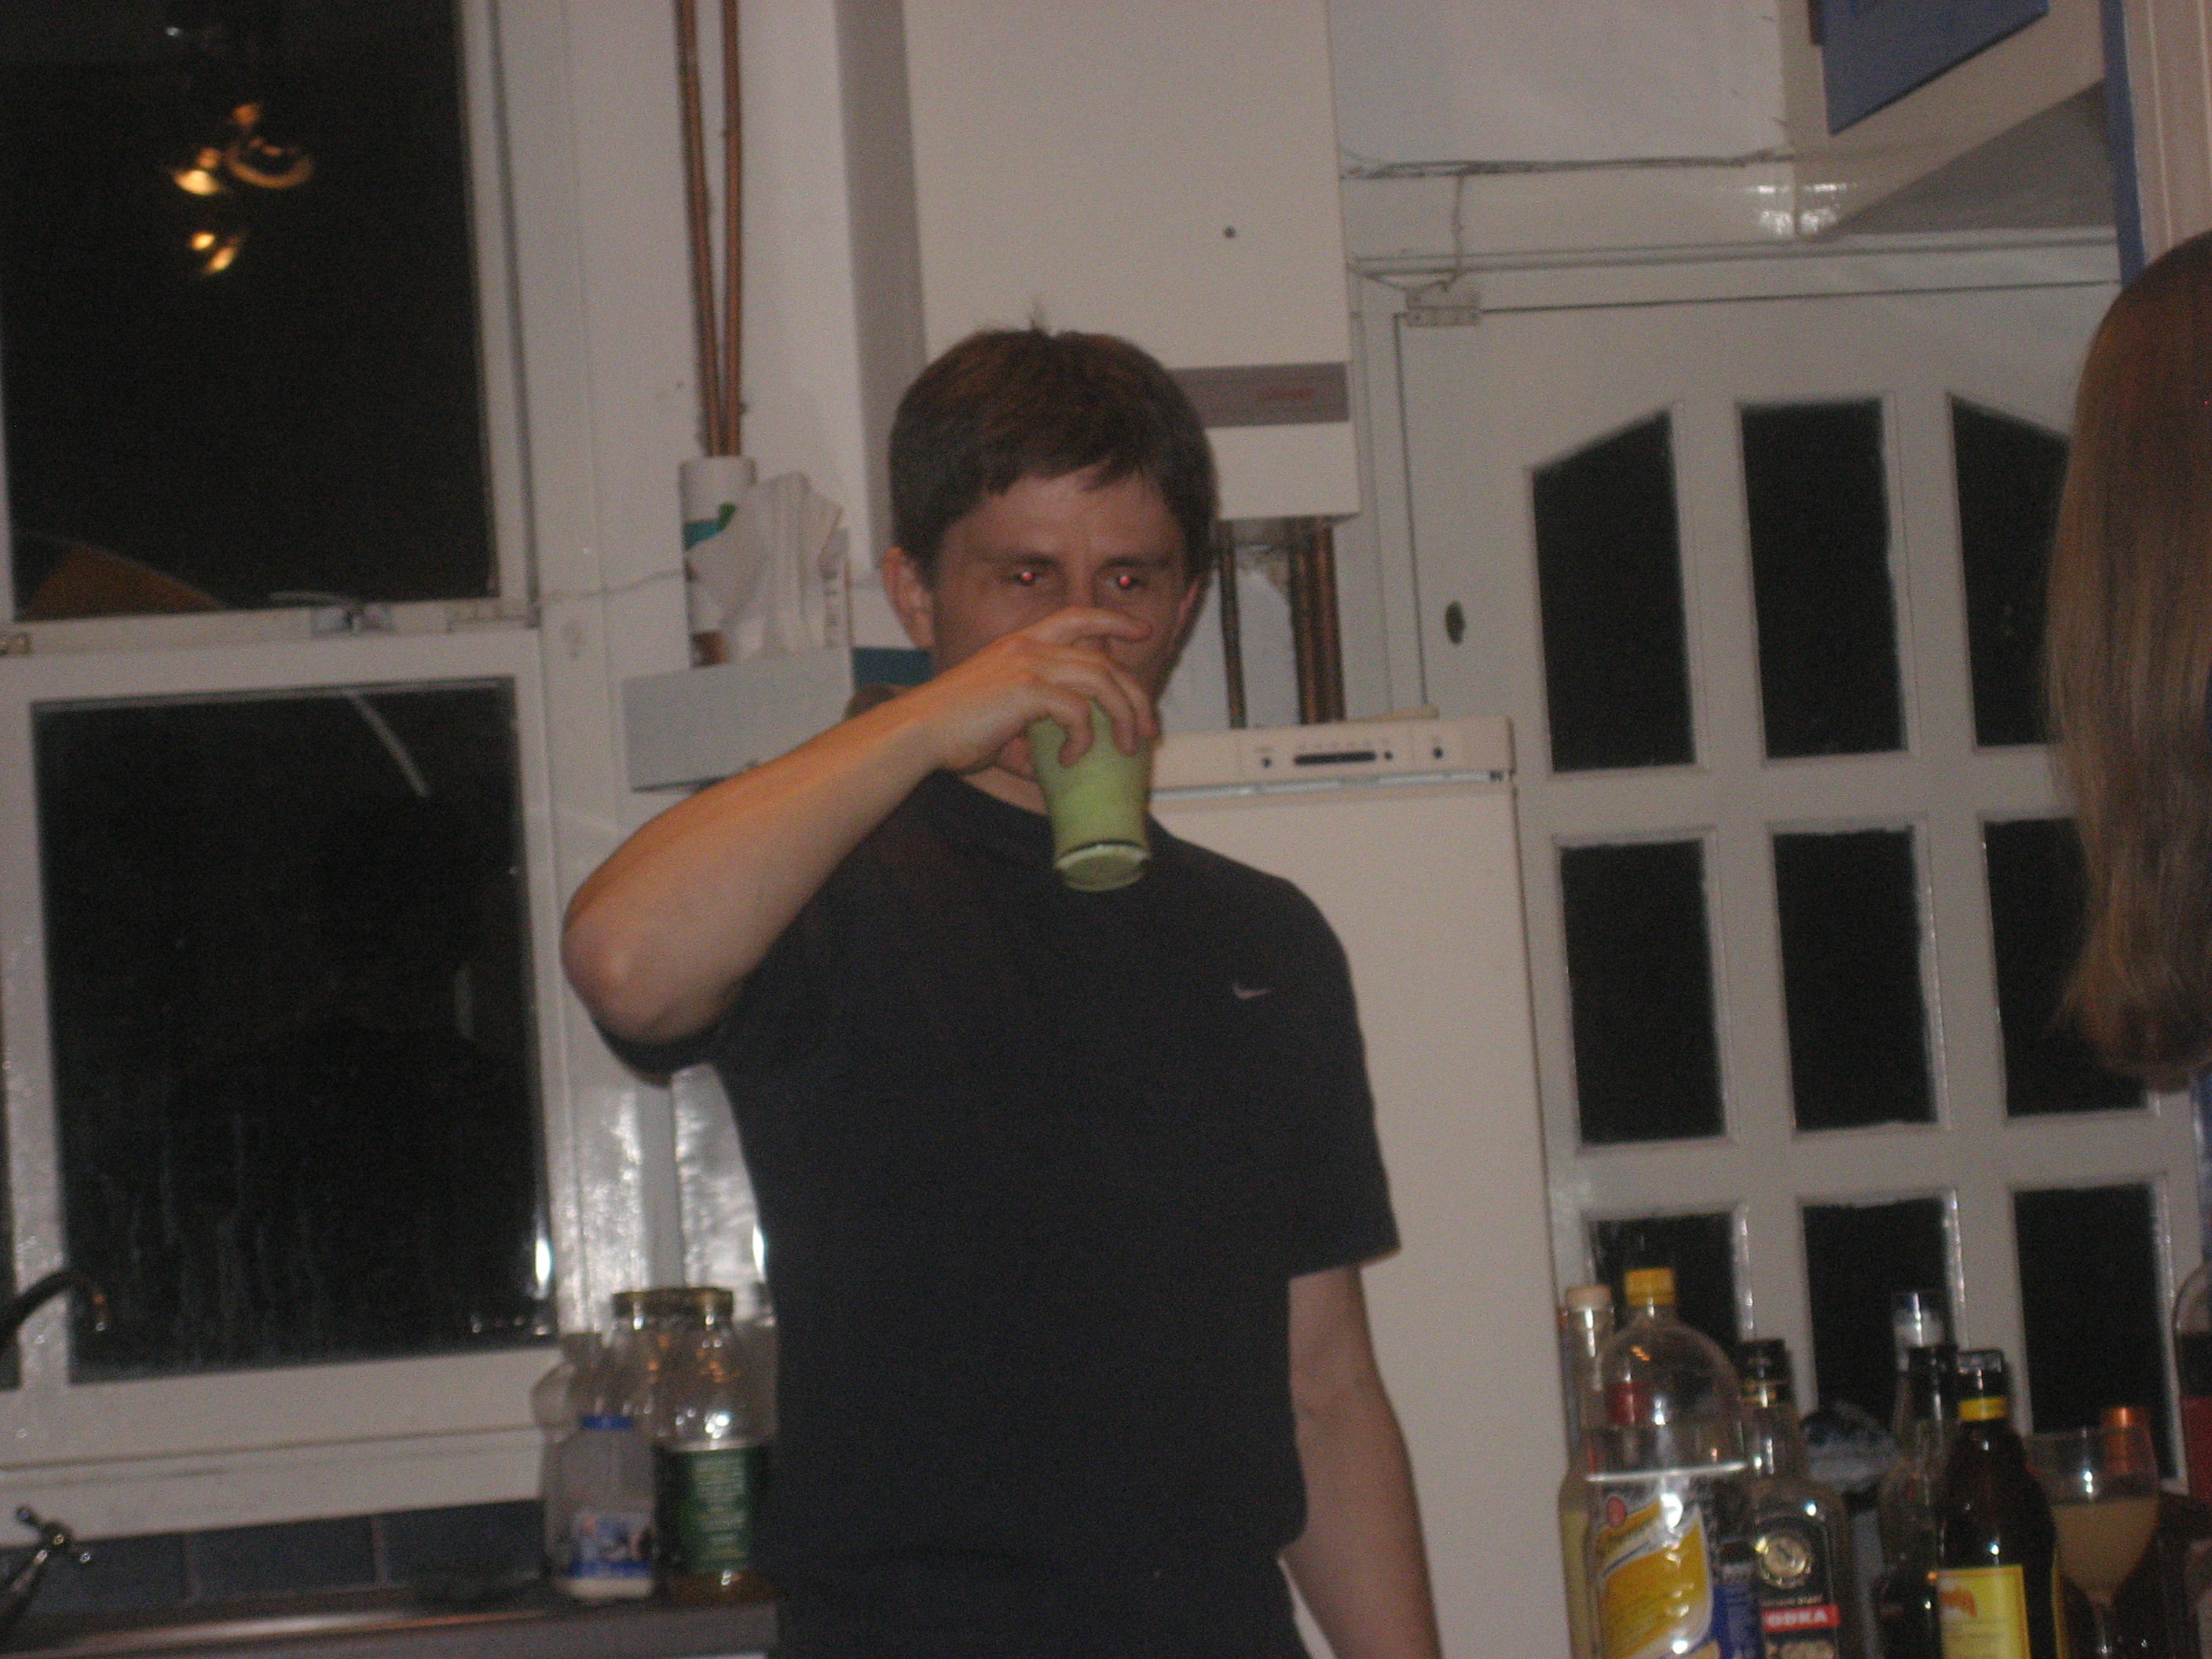 Josh mixing the Drink of Death ... mmm good!